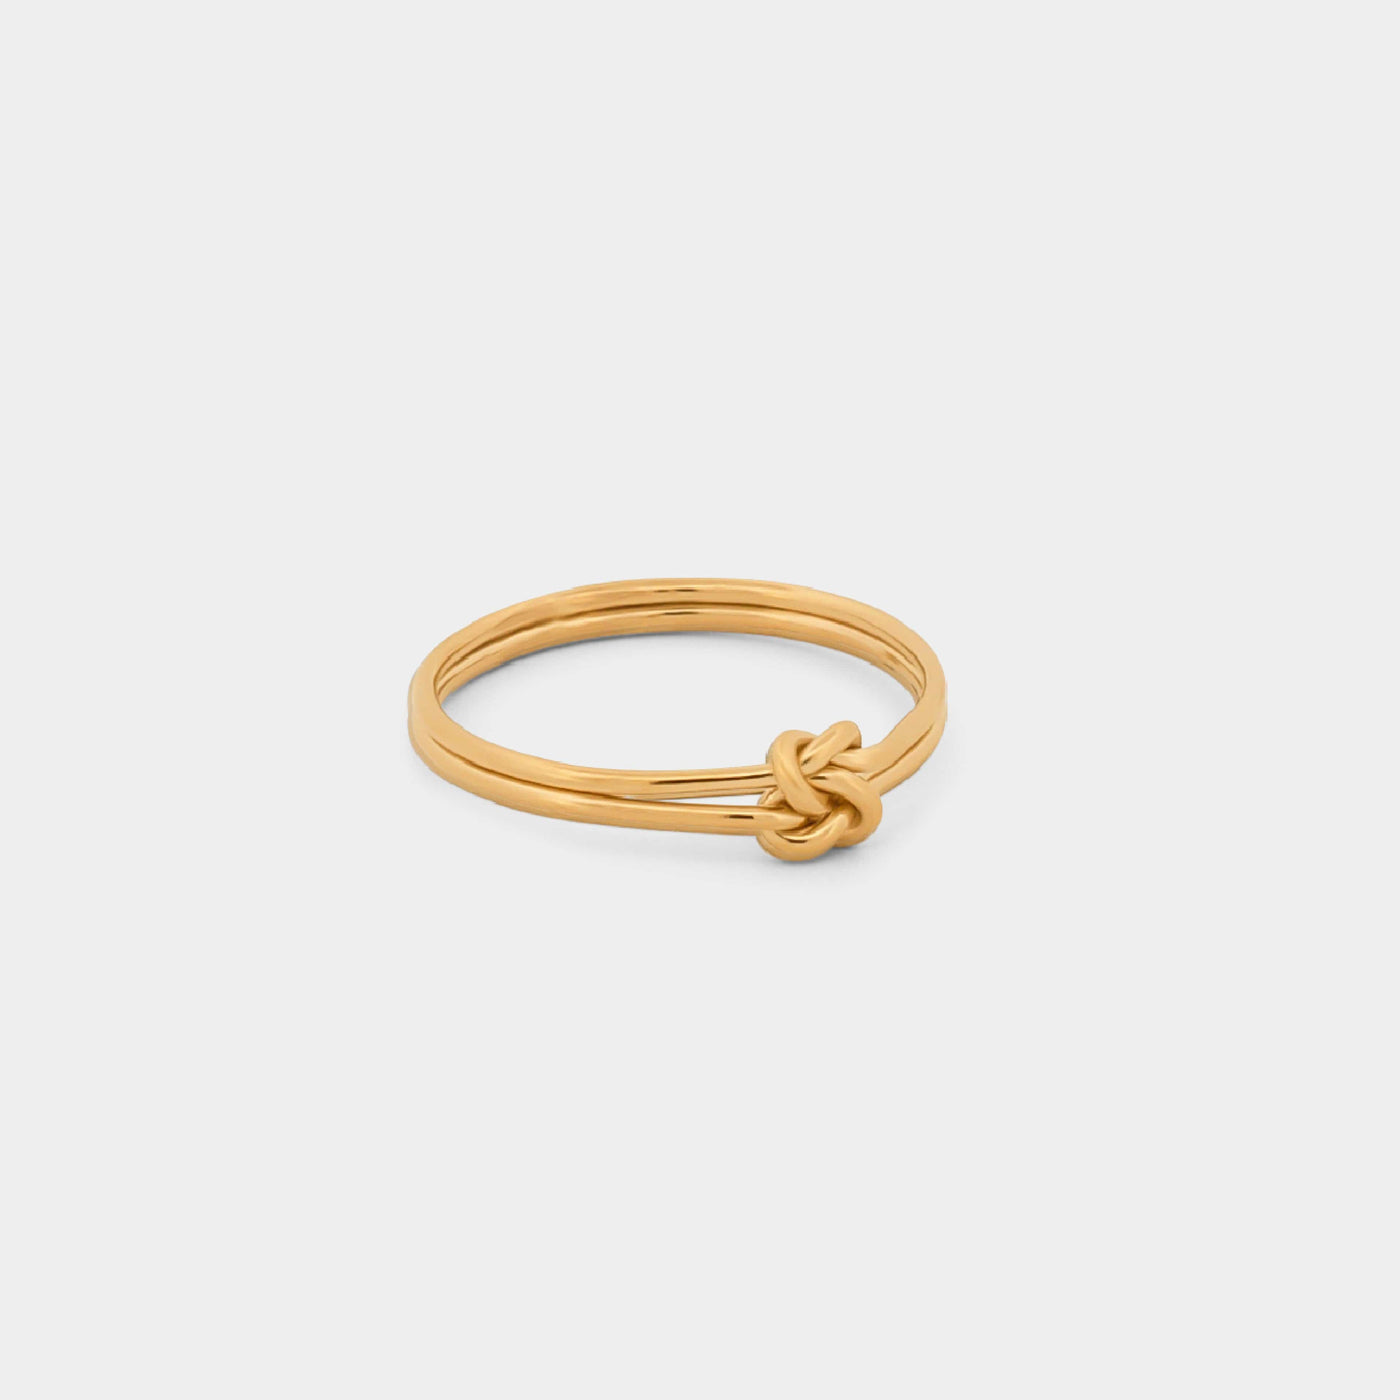 14k gold filled double knot ring